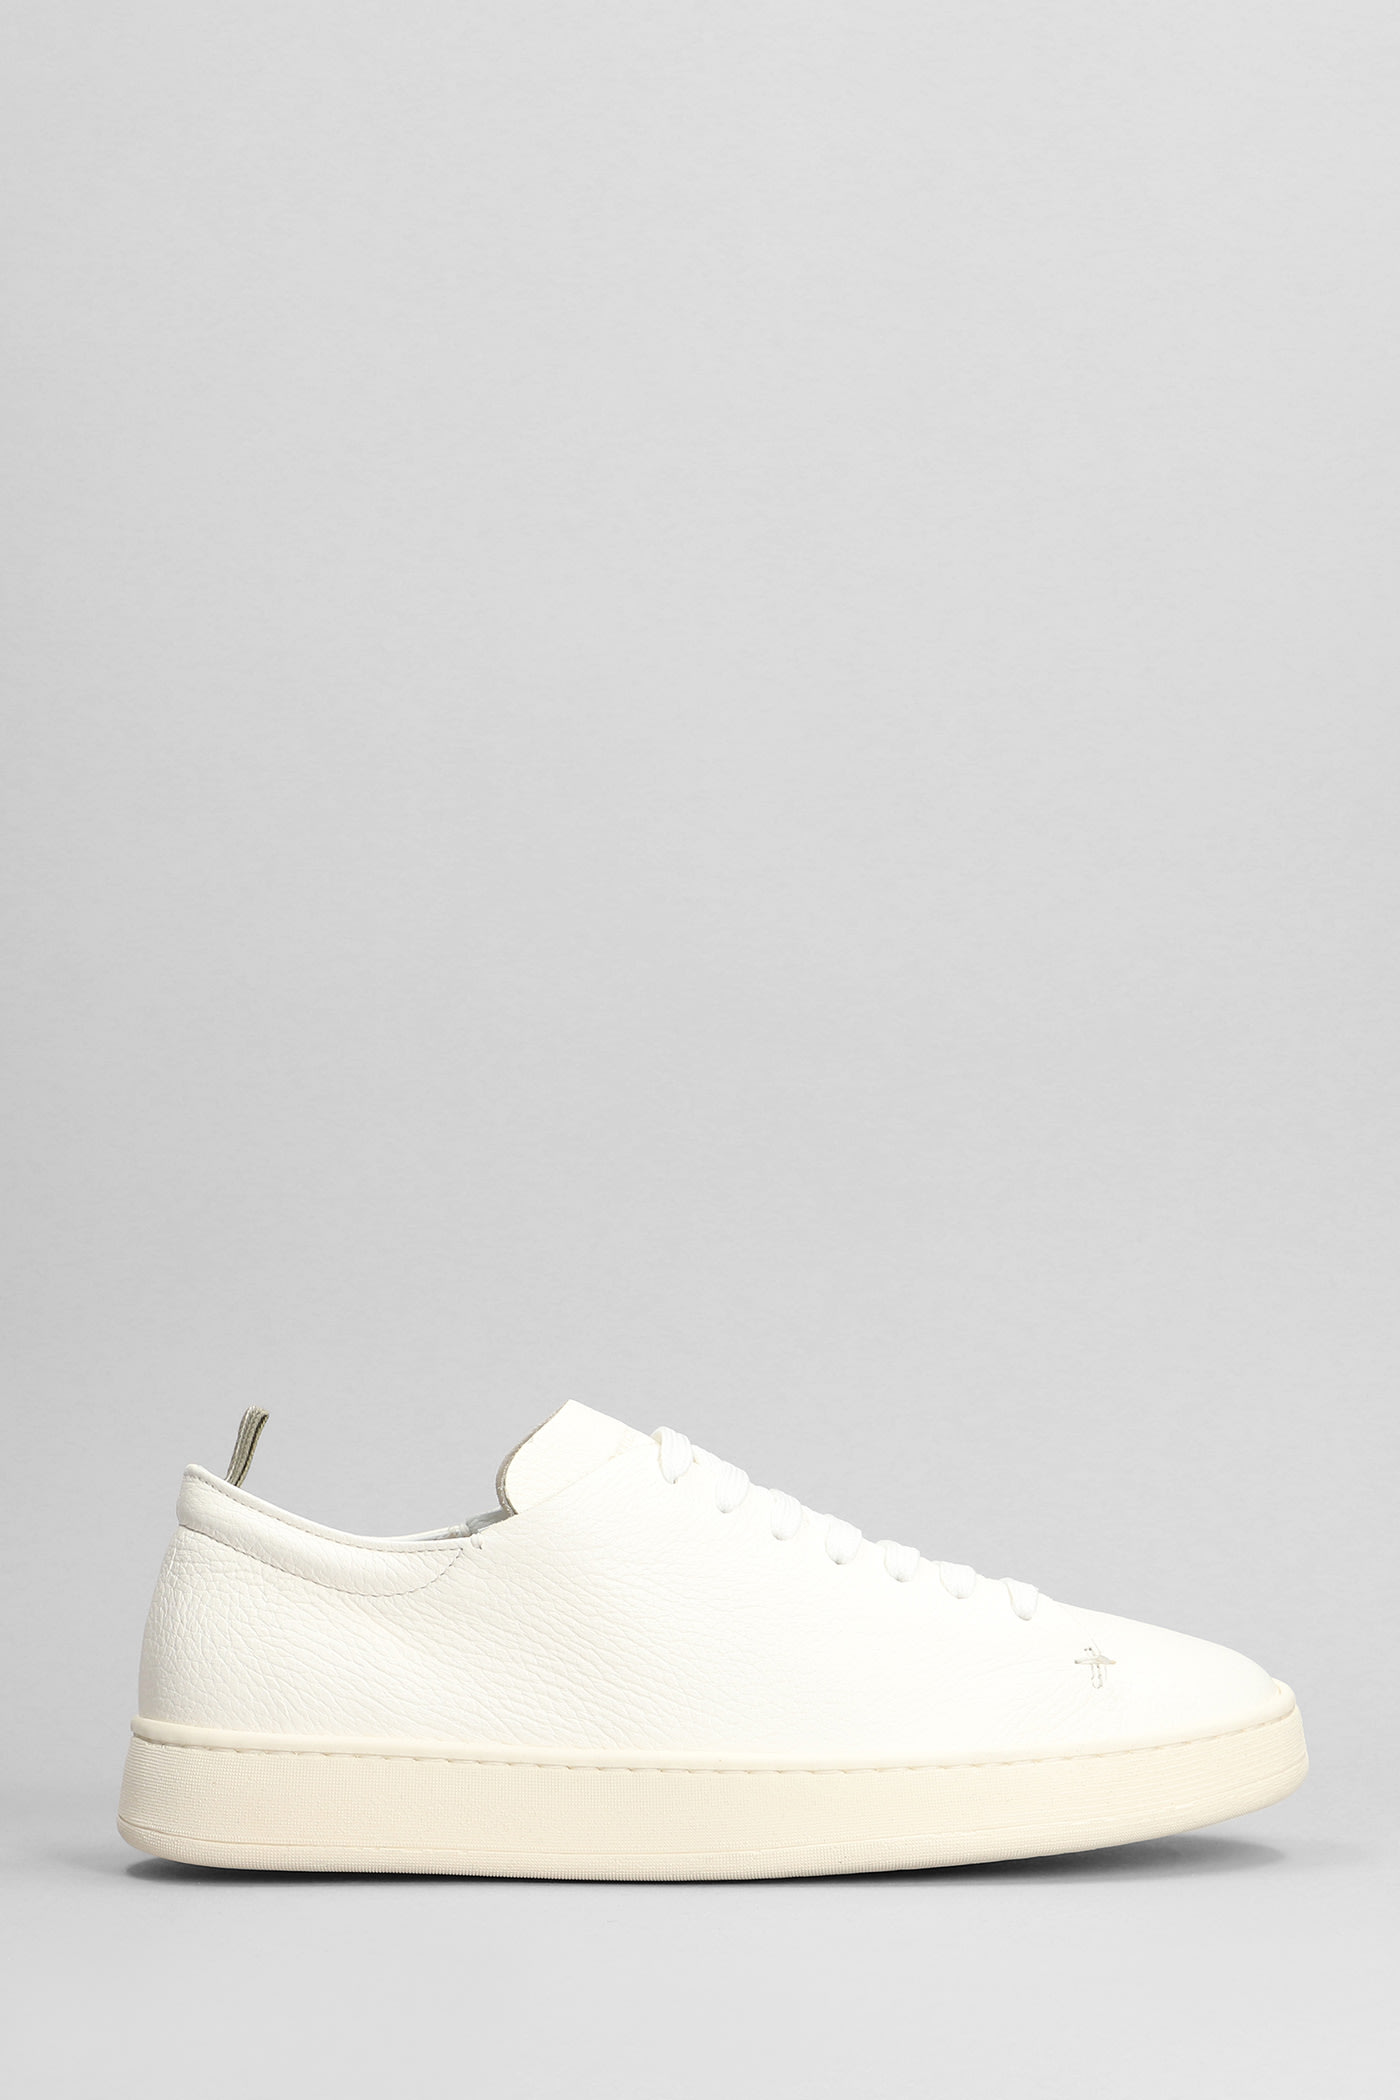 Officine Creative Once 002 Sneakers In White Leather